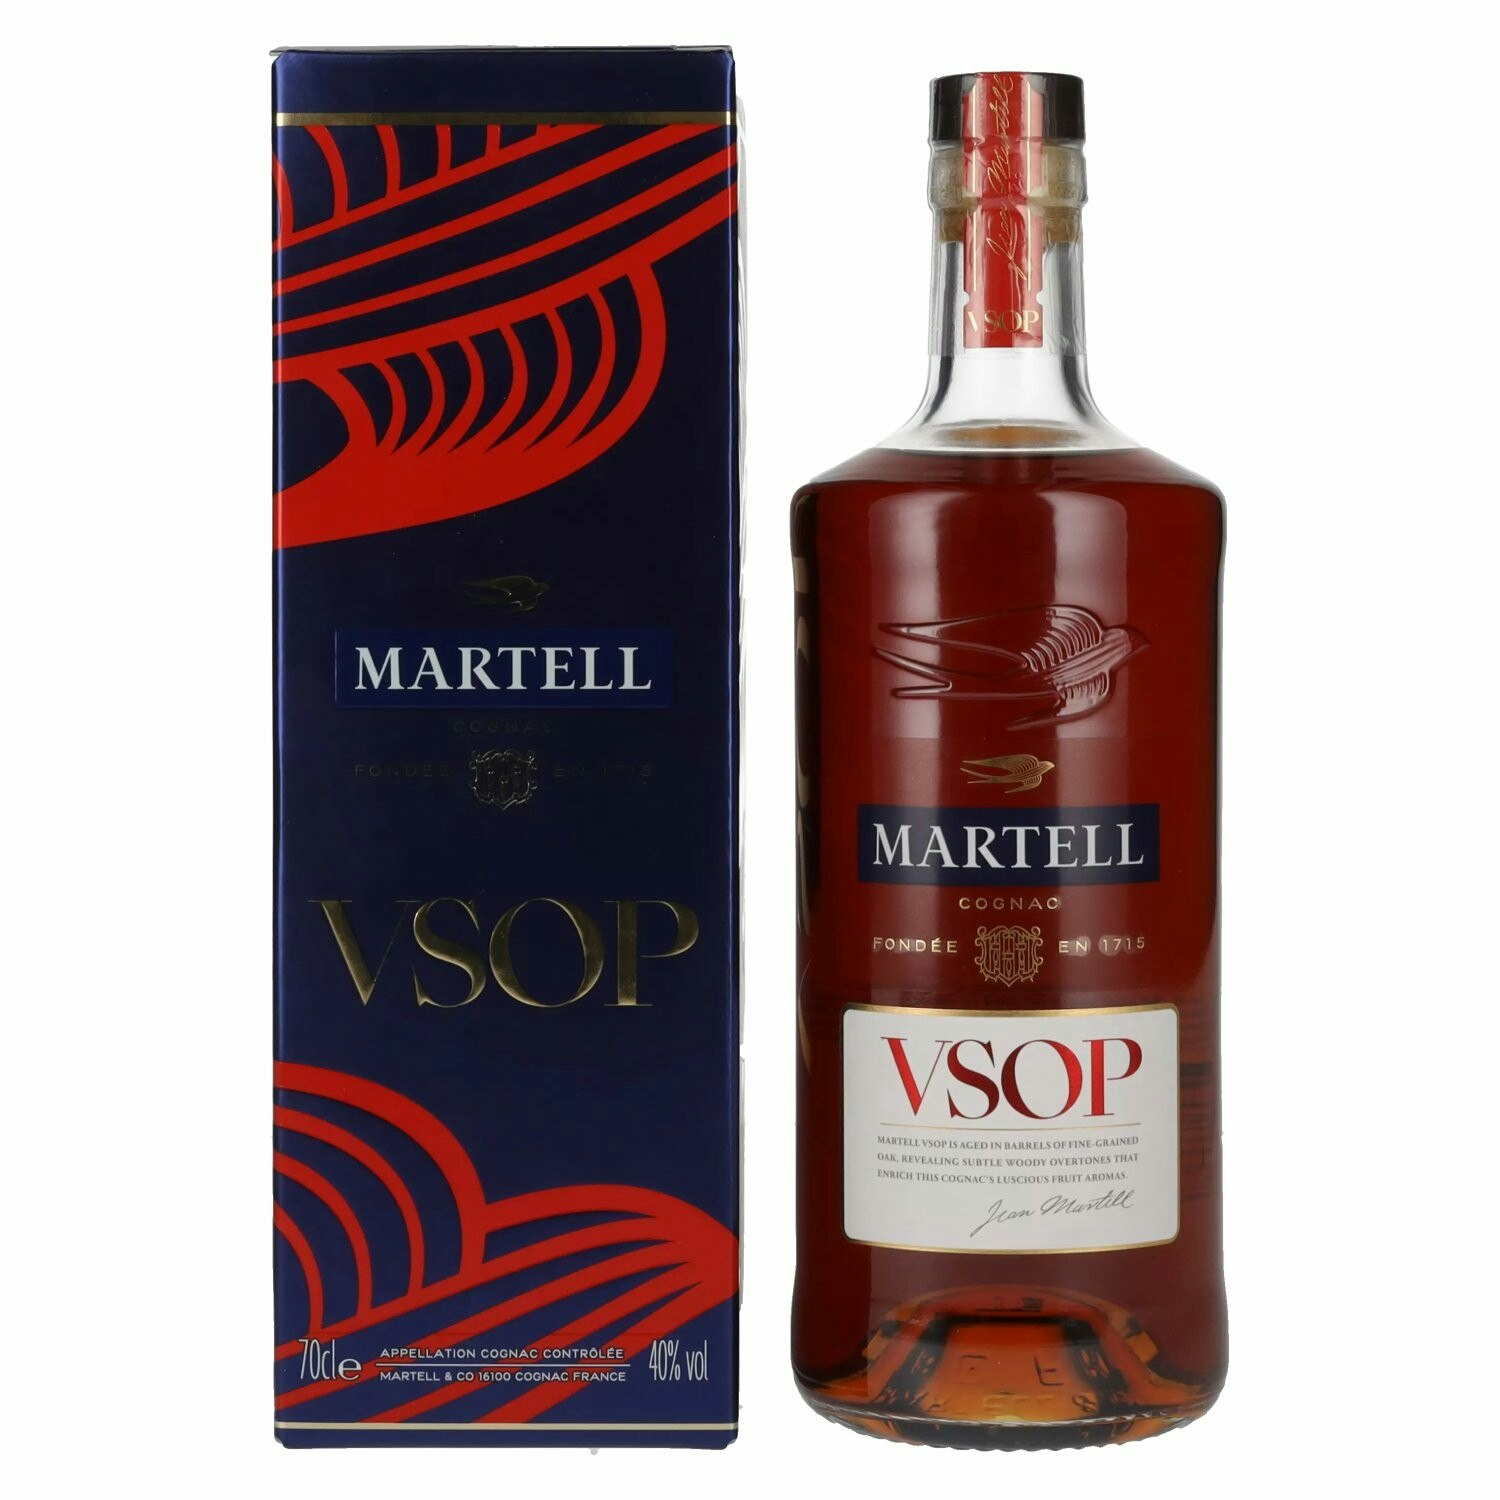 Martell V.S.O.P. Aged in Red Barrels 40% Vol. 0,7l in Giftbox